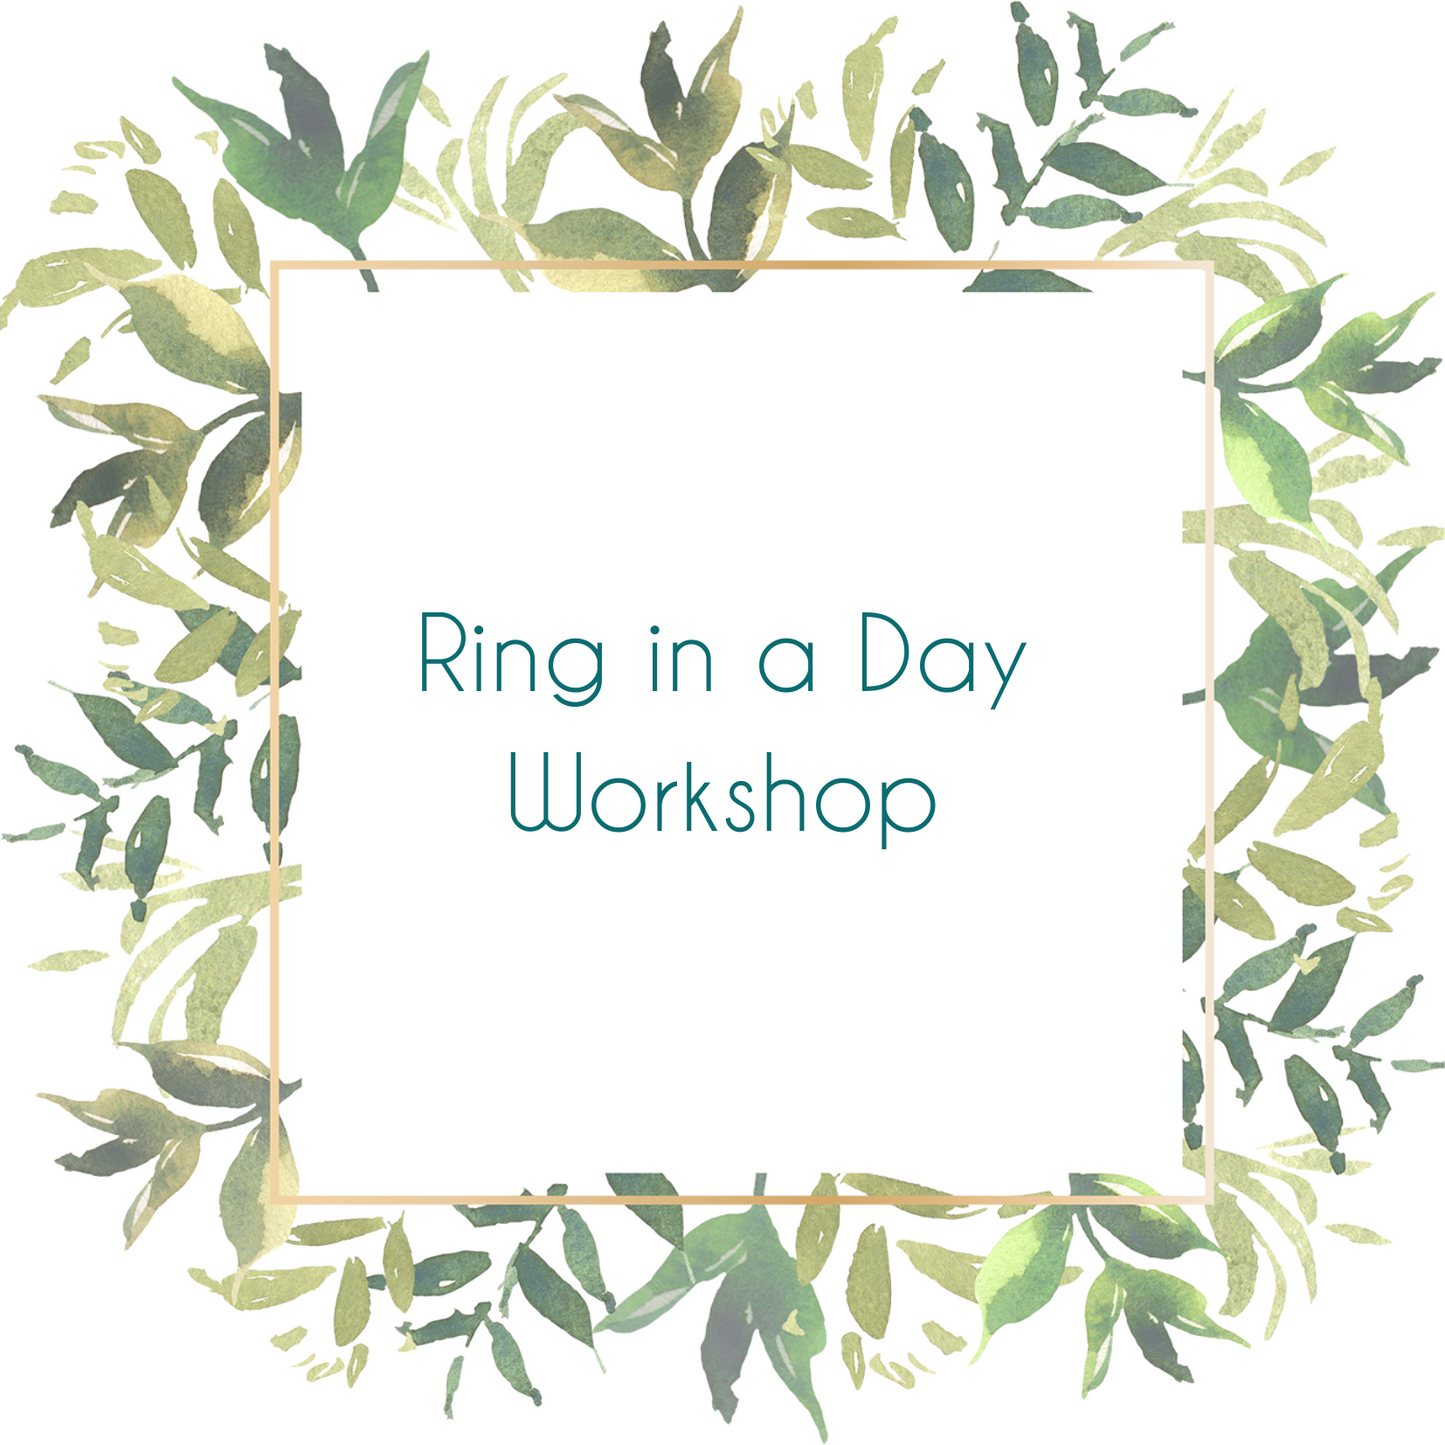 Ring in a Day Workshop